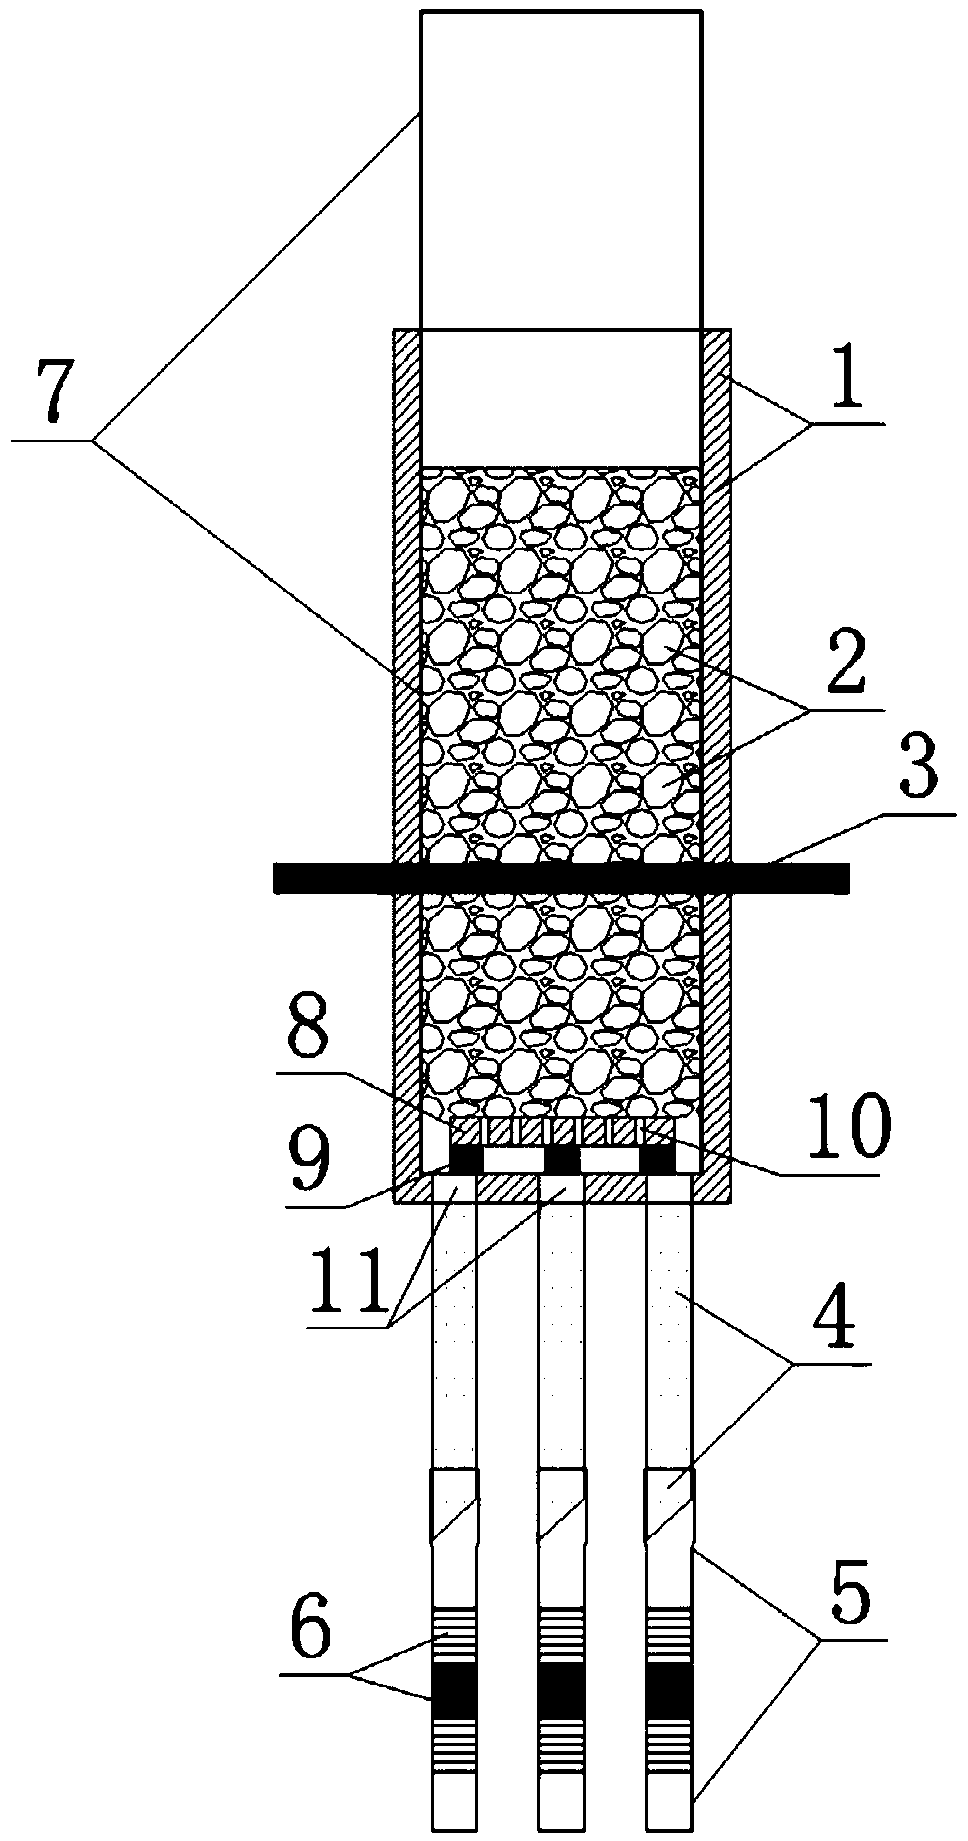 Test device and method based on MICP reinforced calcareous coarse-grained soil